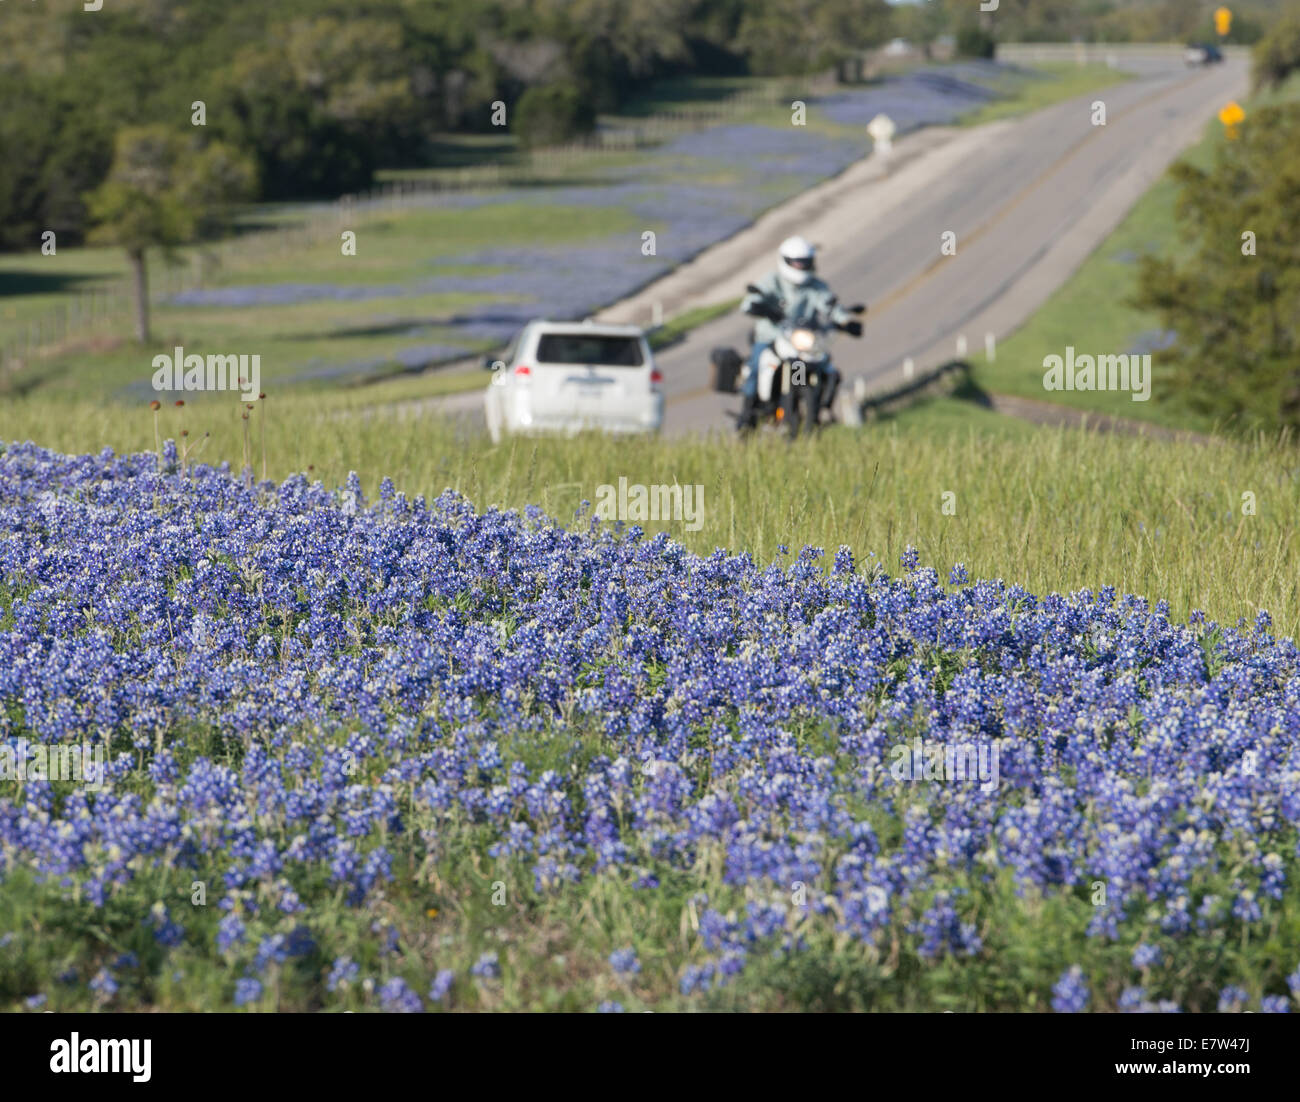 Wild bluebonnets blossom each spring along the roadsides and pasture lands throughout Texas. Stock Photo